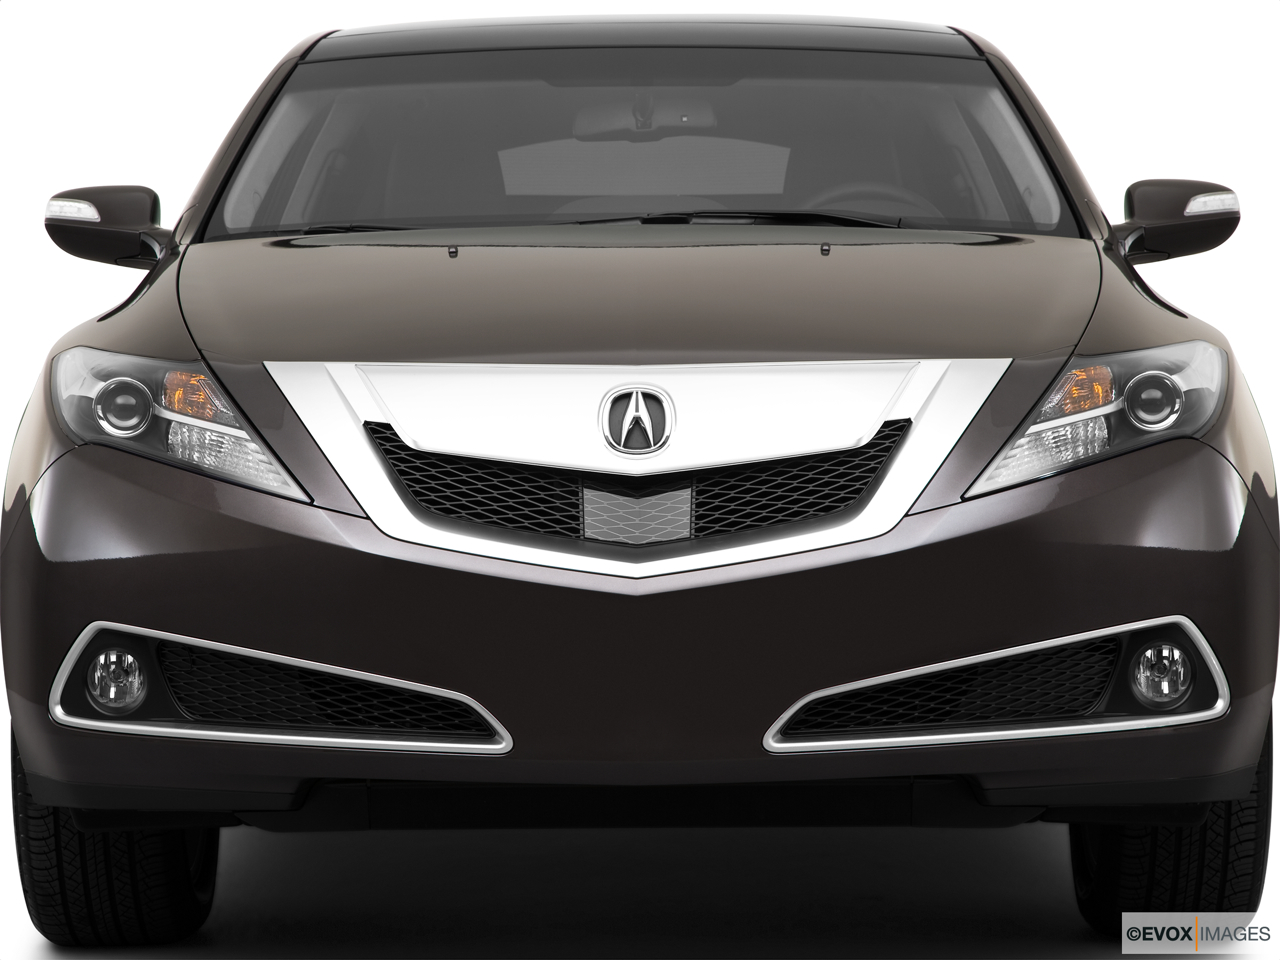 2010 Acura ZDX ZDX Advance Close up of Grill. 